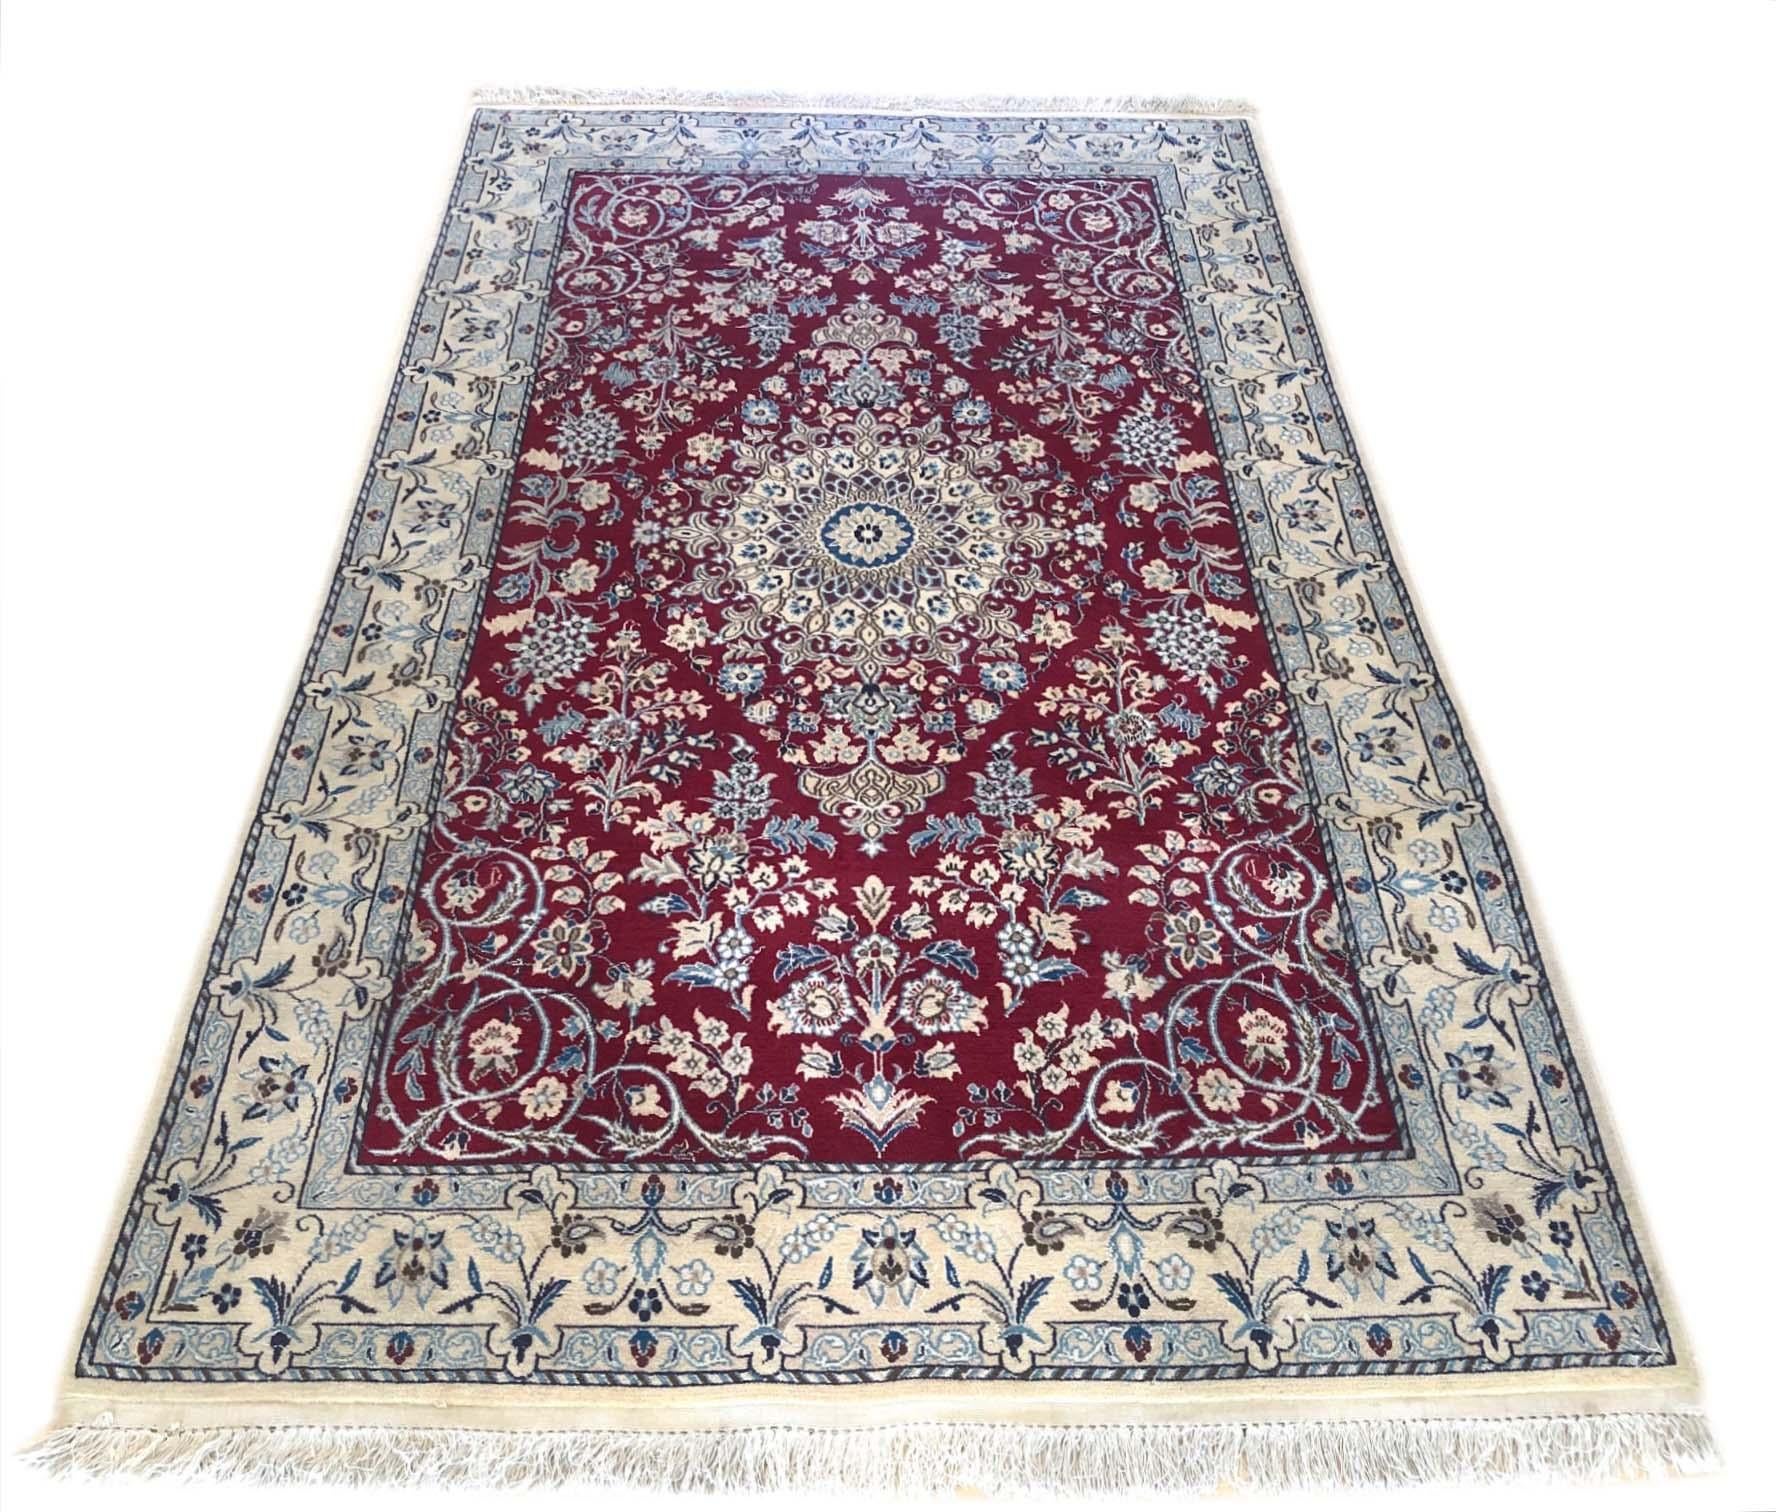 This authentic Persian handmade Nain rug has wool and silk pile with cotton foundation. Nain is a city in Iran that is well known for producing Fine handmade rug. This beautiful rug is from Iran, Nain and the design is floral medallion. The base